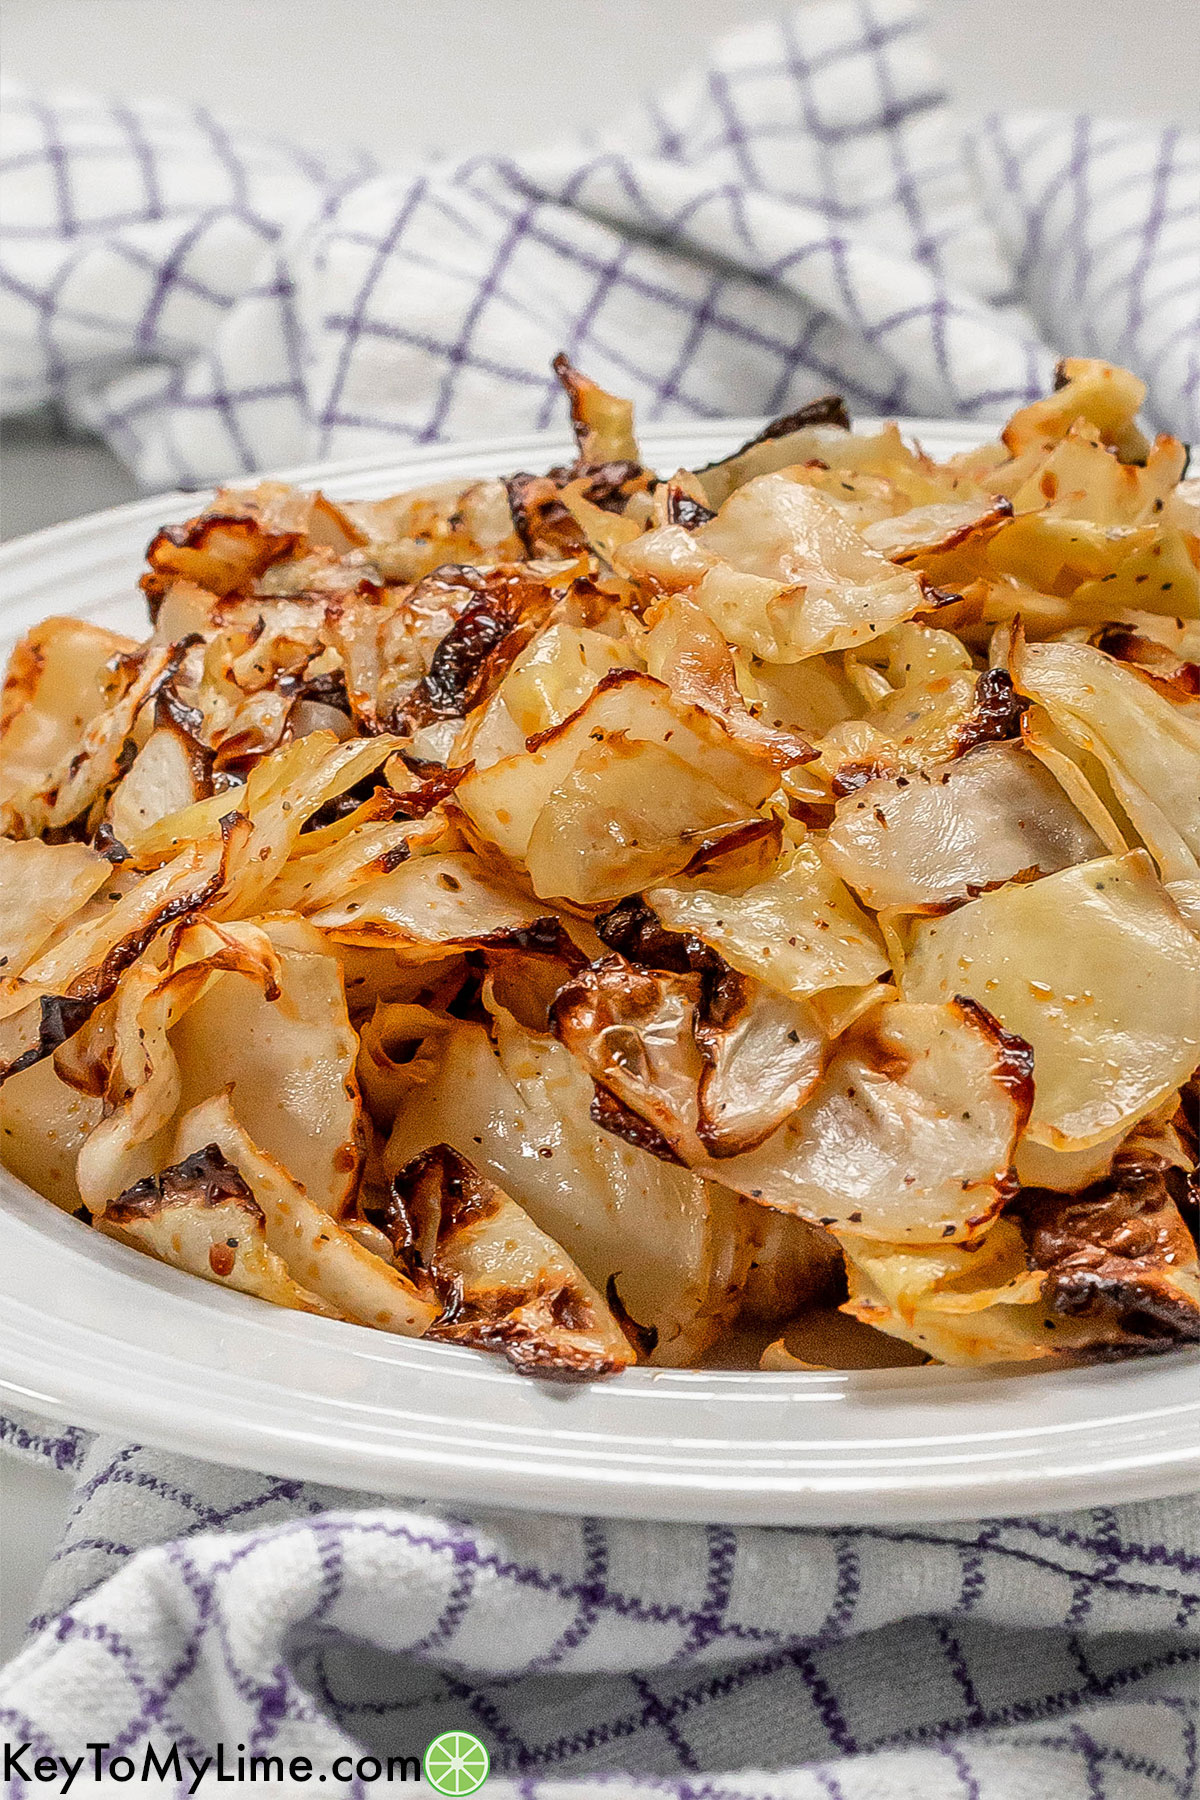 A side image of air fried cabbage piled up in a white bowl with a striped napkin underneath.